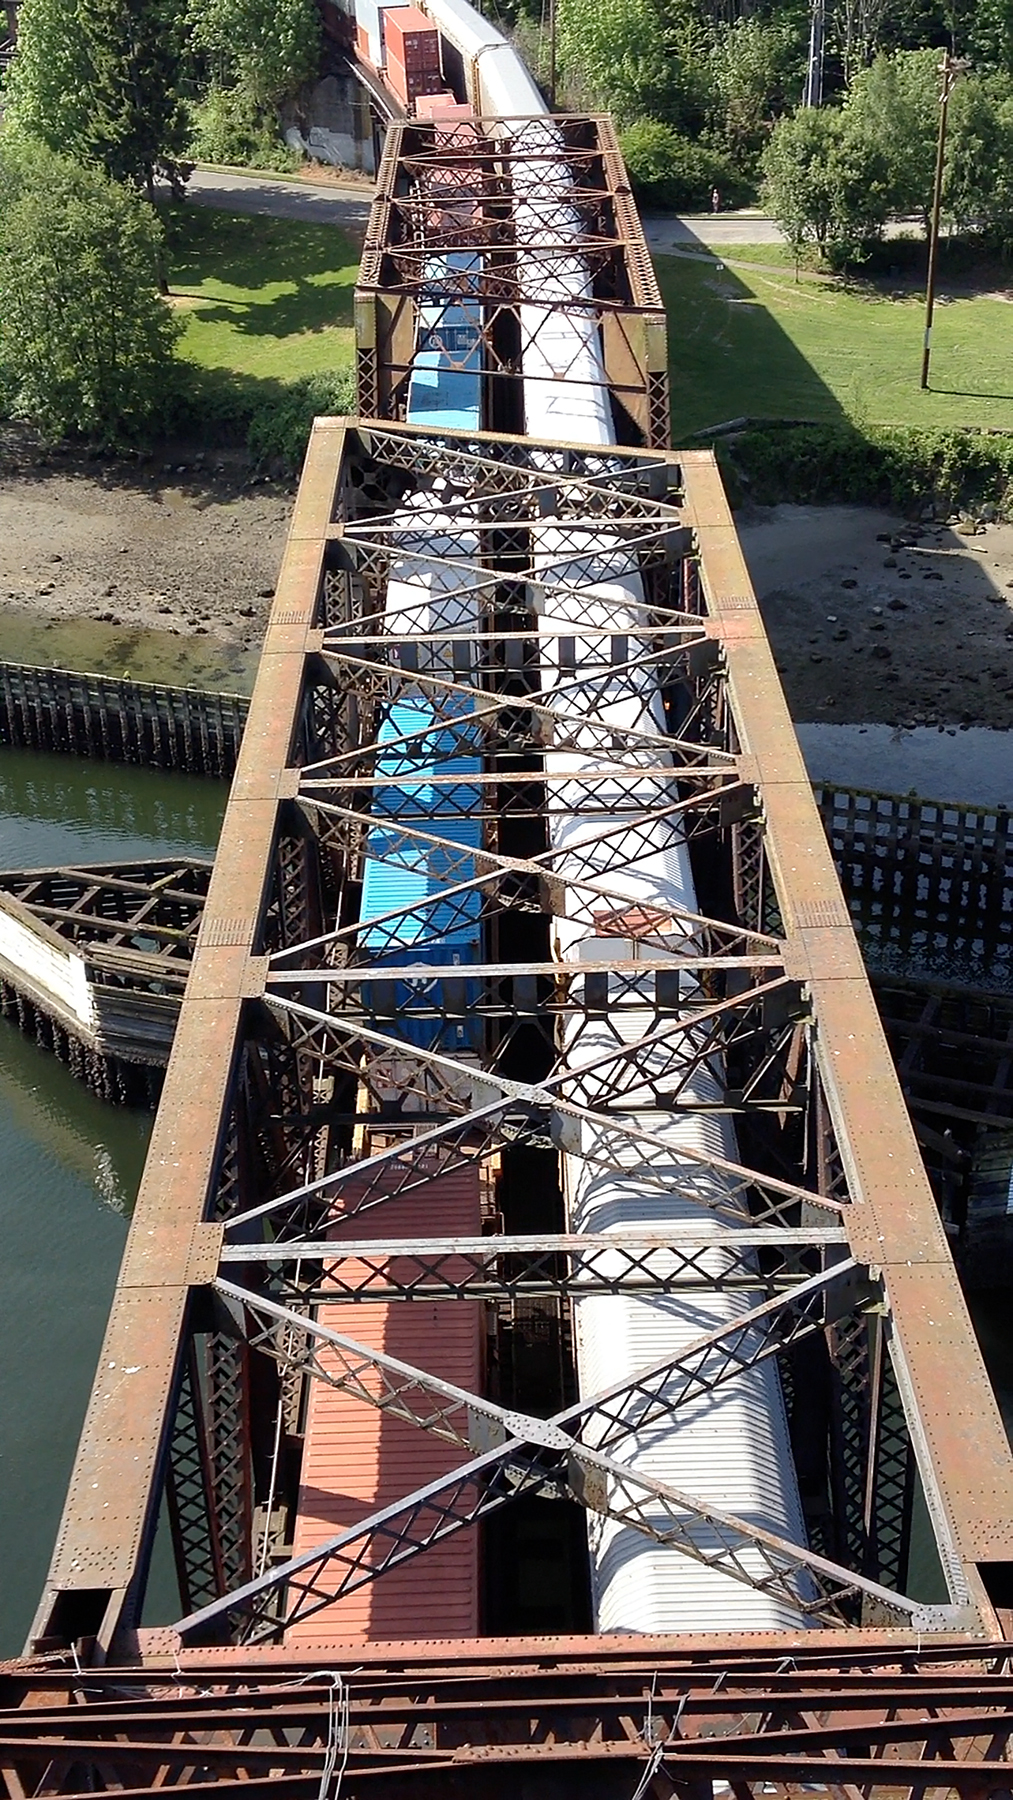 Photo of a Railway Bridge taken by Fry Technical Services Vice President Gary Fry